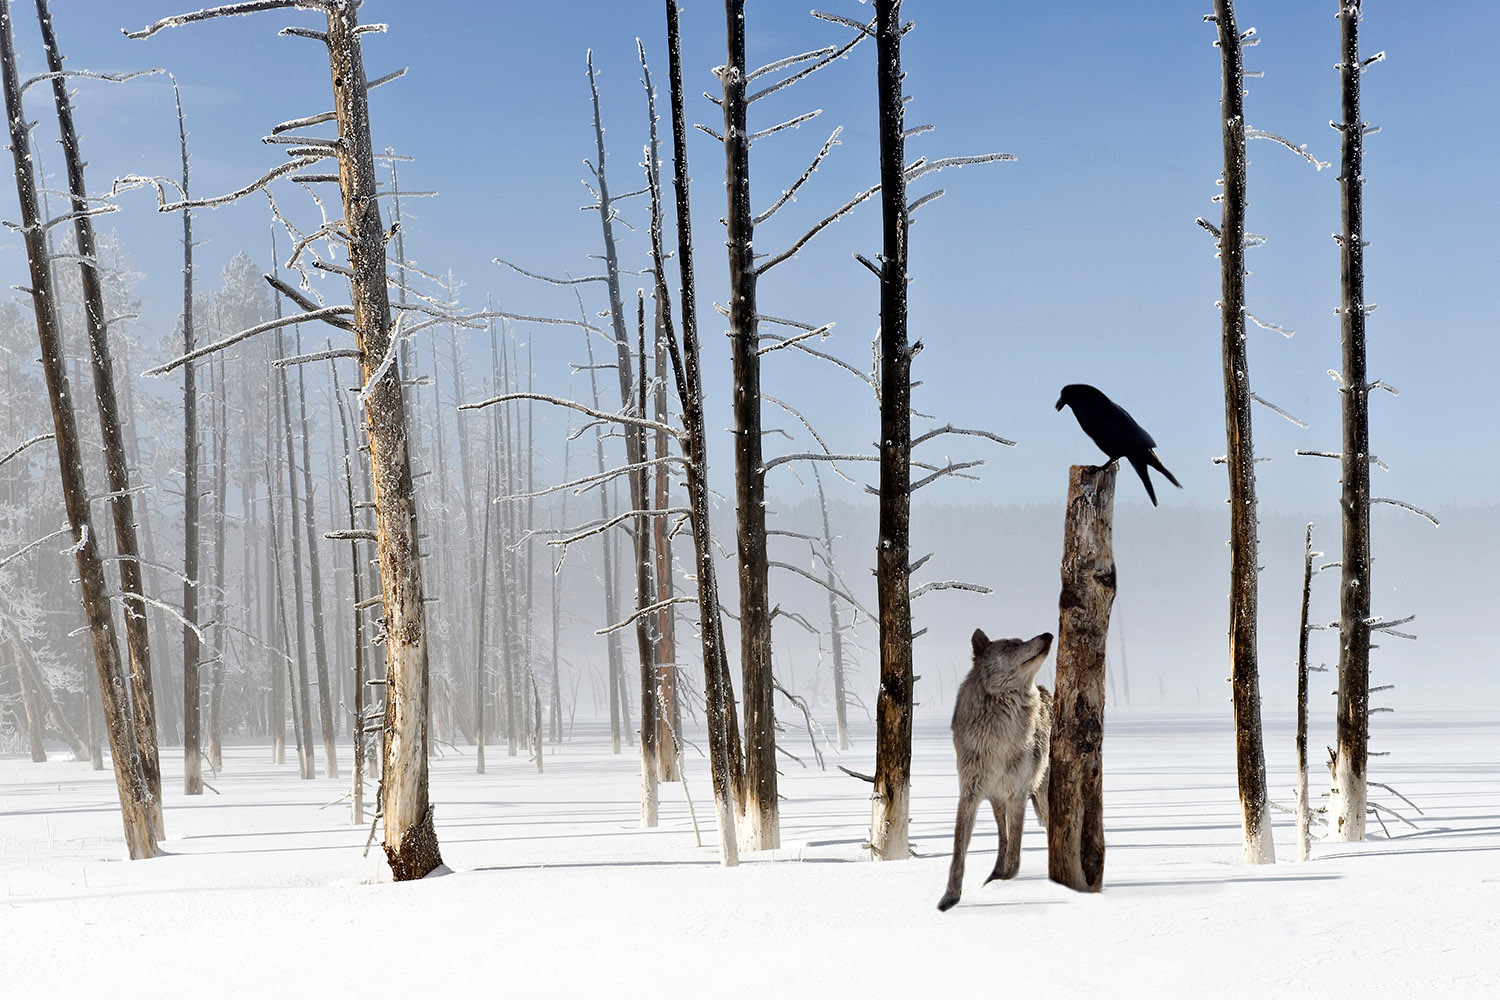 A wolf looking up at a raven that is sitting atop a lamppost-high tree stump in a snow covered landscape within Yellowstone National Park